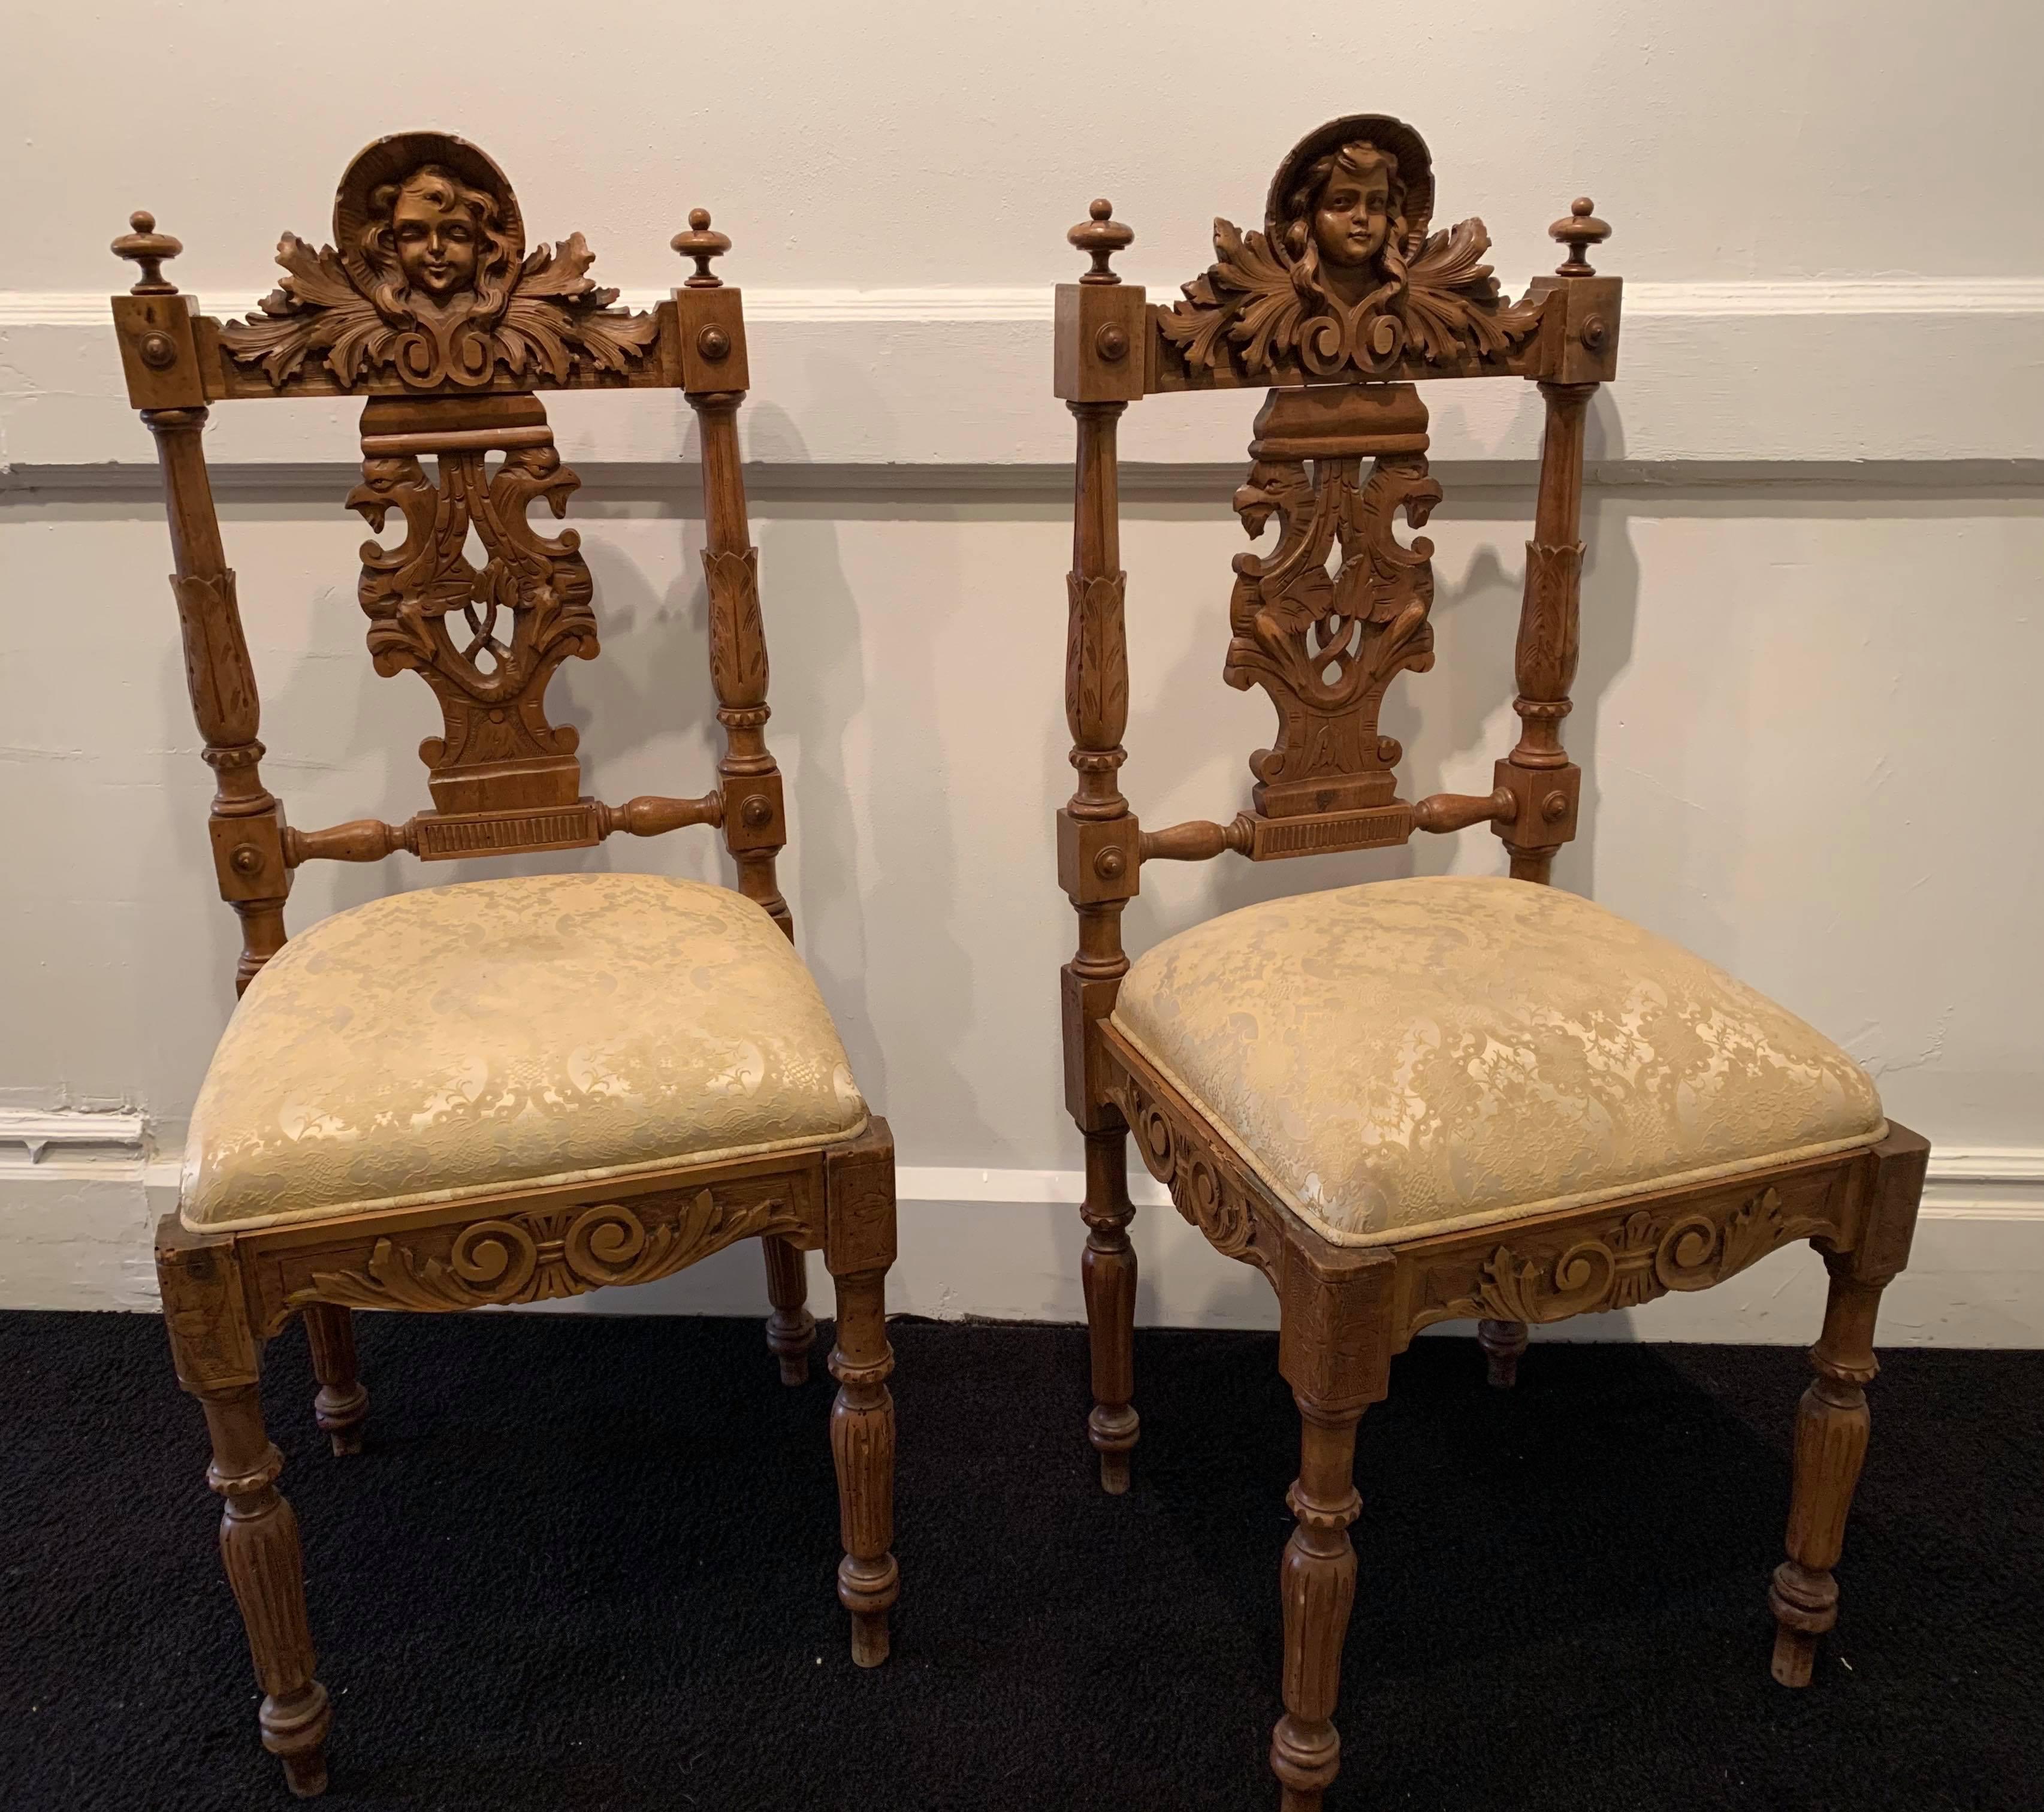 19th Century Pair of Hand-Carved Hall Chairs from Mexico - Brown Figurative Sculpture by Unknown